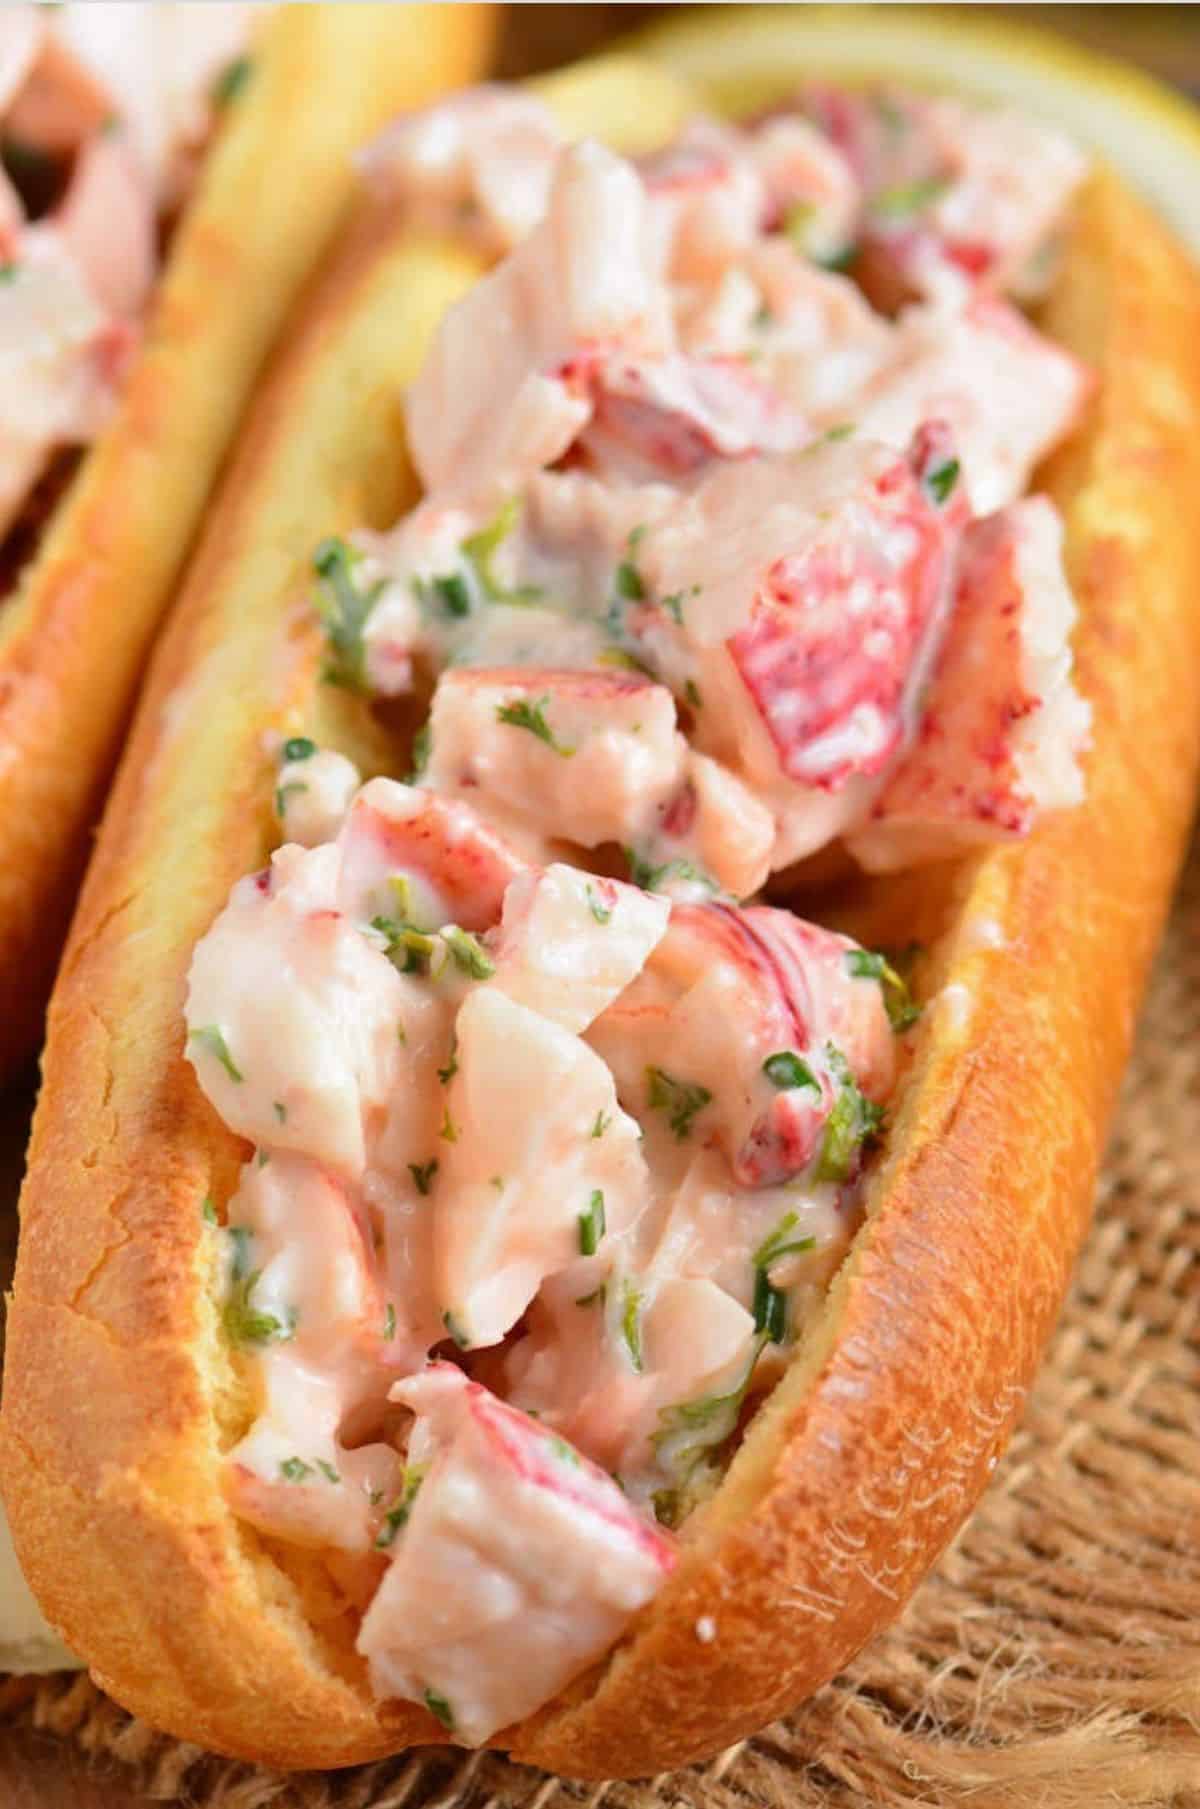 one long bun filled with lobster mixture.